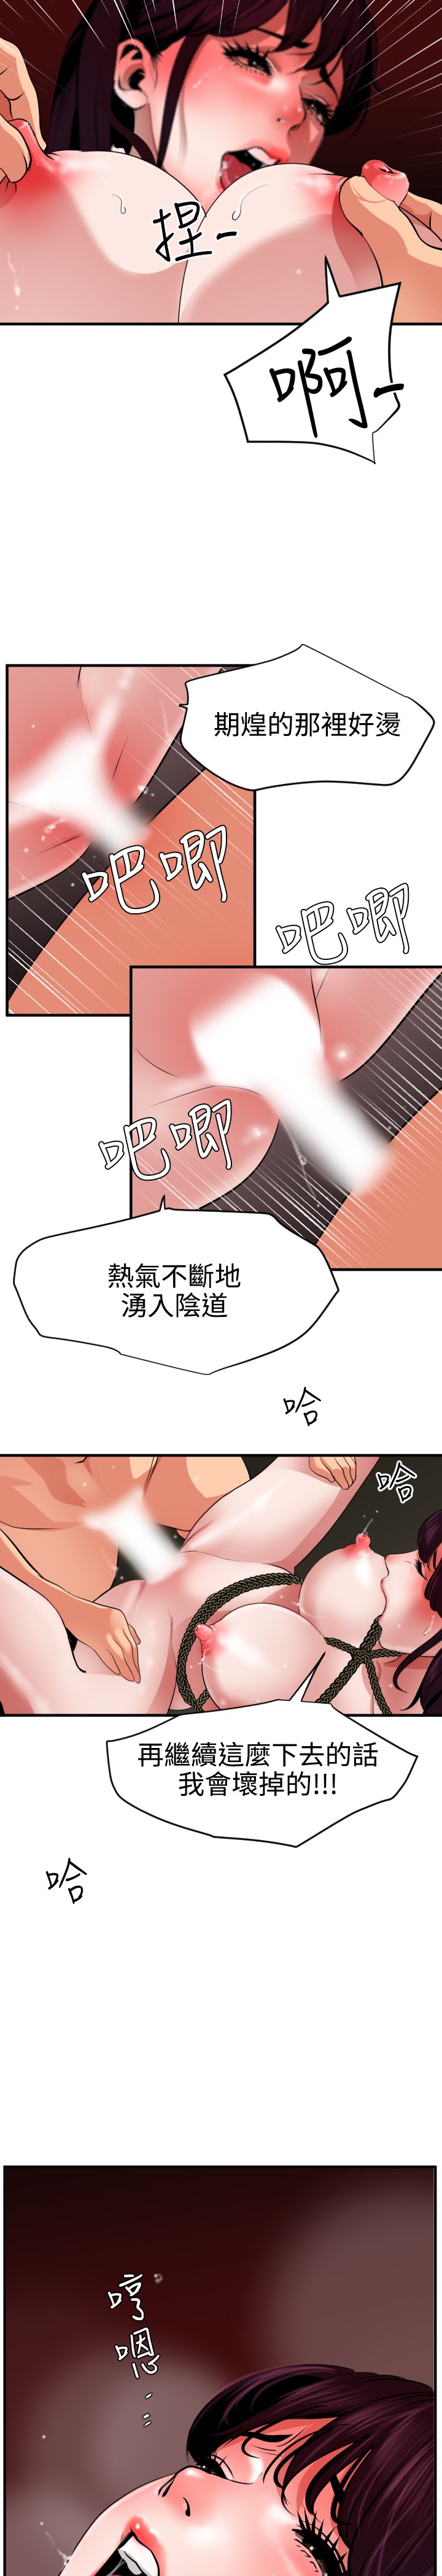 Desire King 欲求王 Ch.41~53 [Chinese] [黑嘿嘿] 慾求王